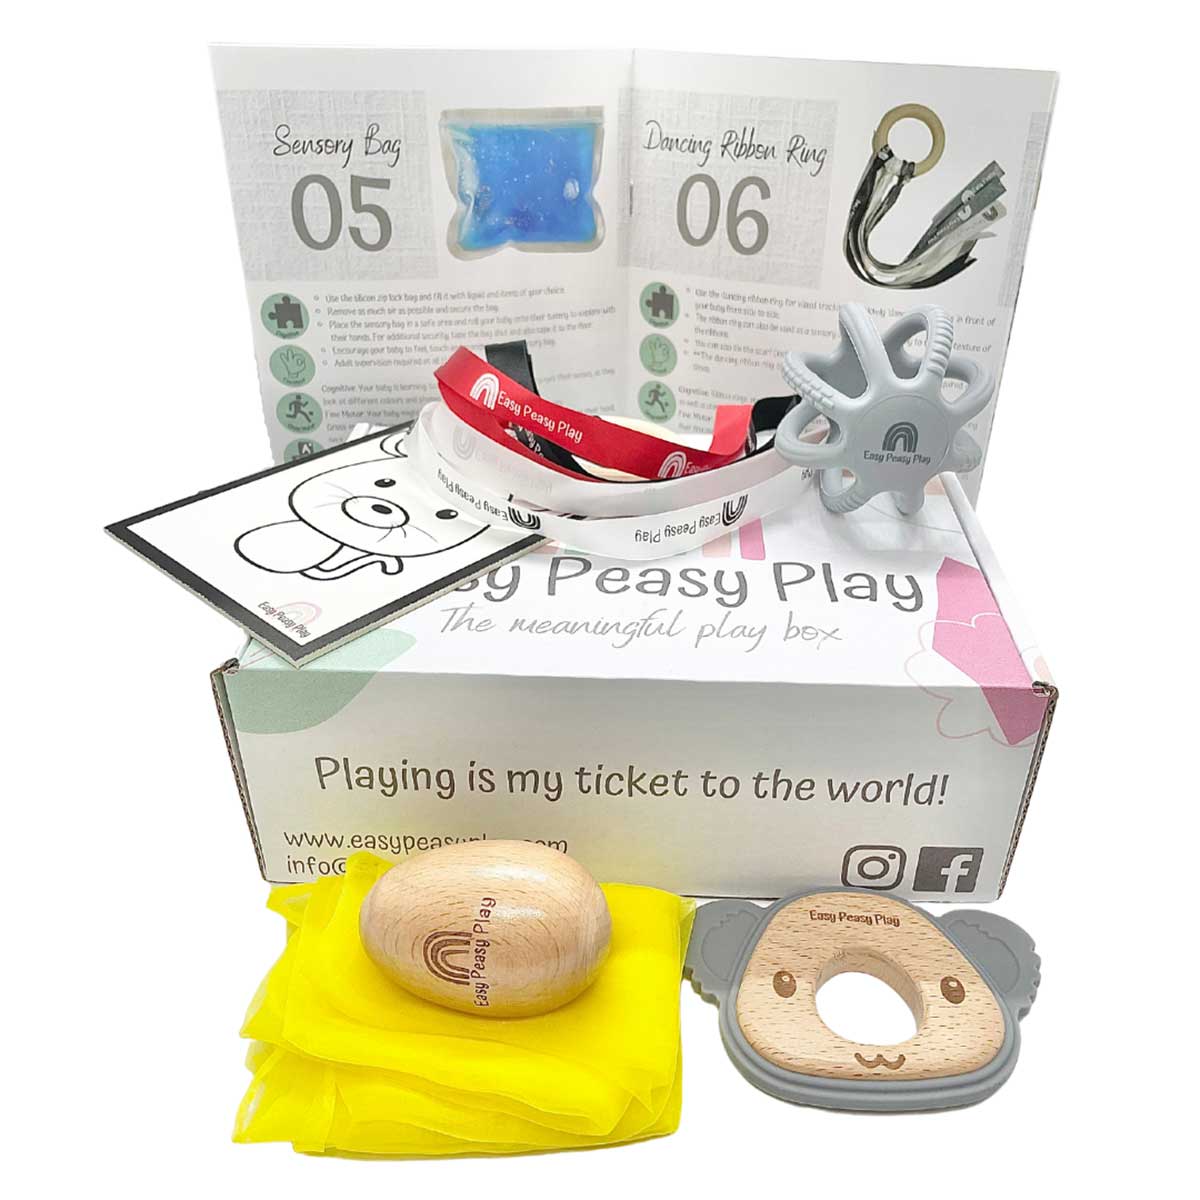 Meaningful Play Box from Easy Peasy Play